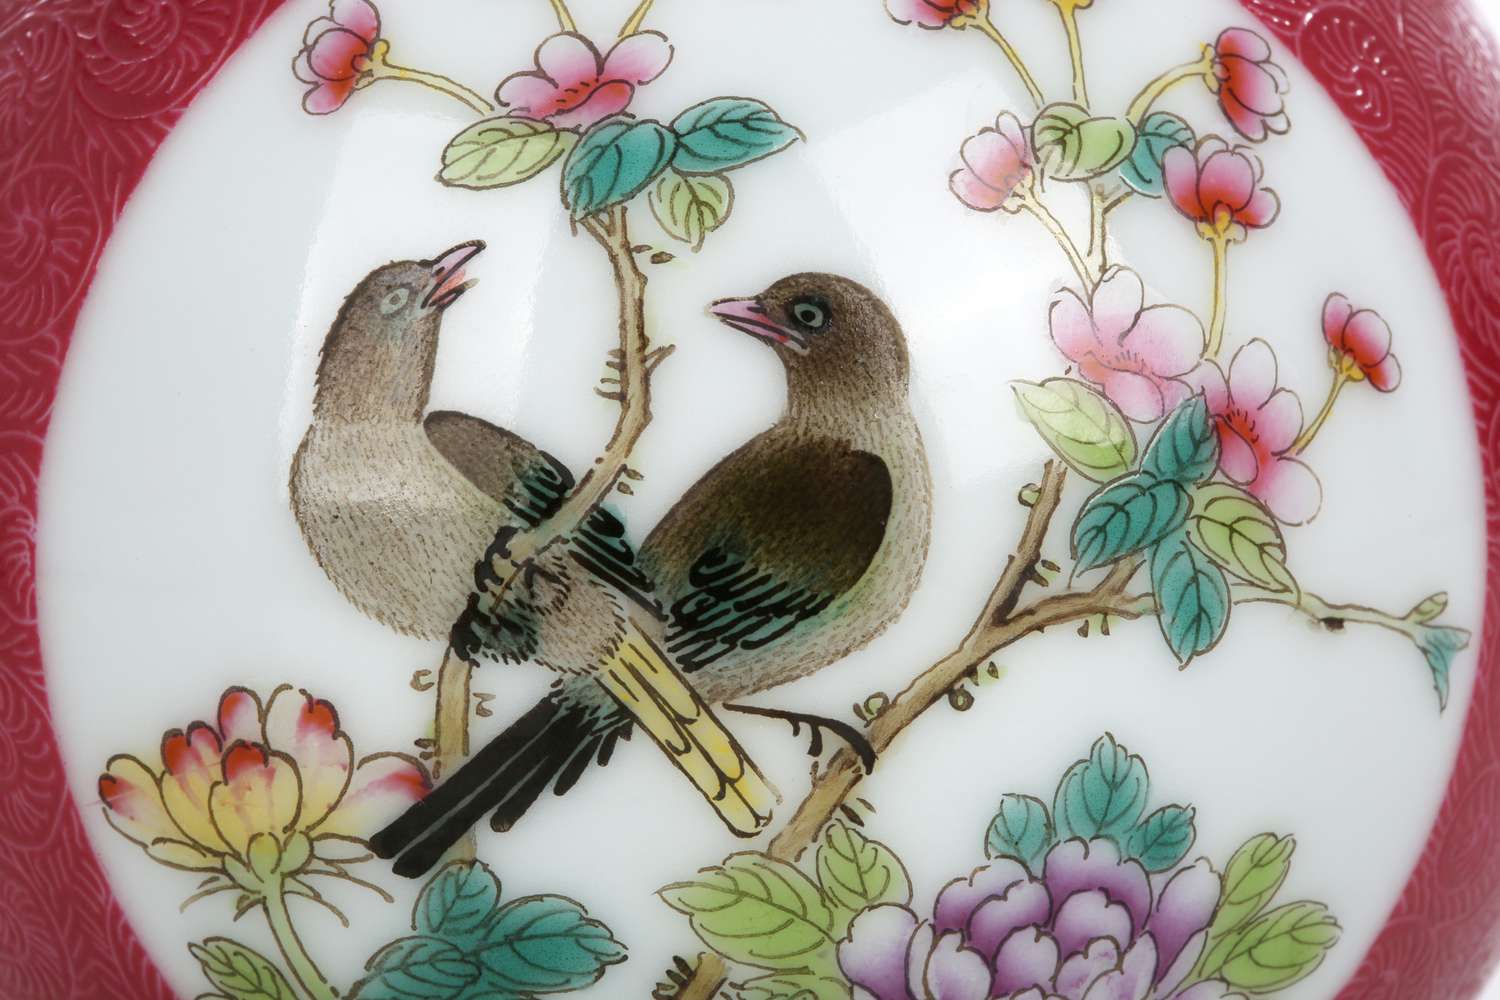 close up detail of a pair of magpies on a porcelain vase